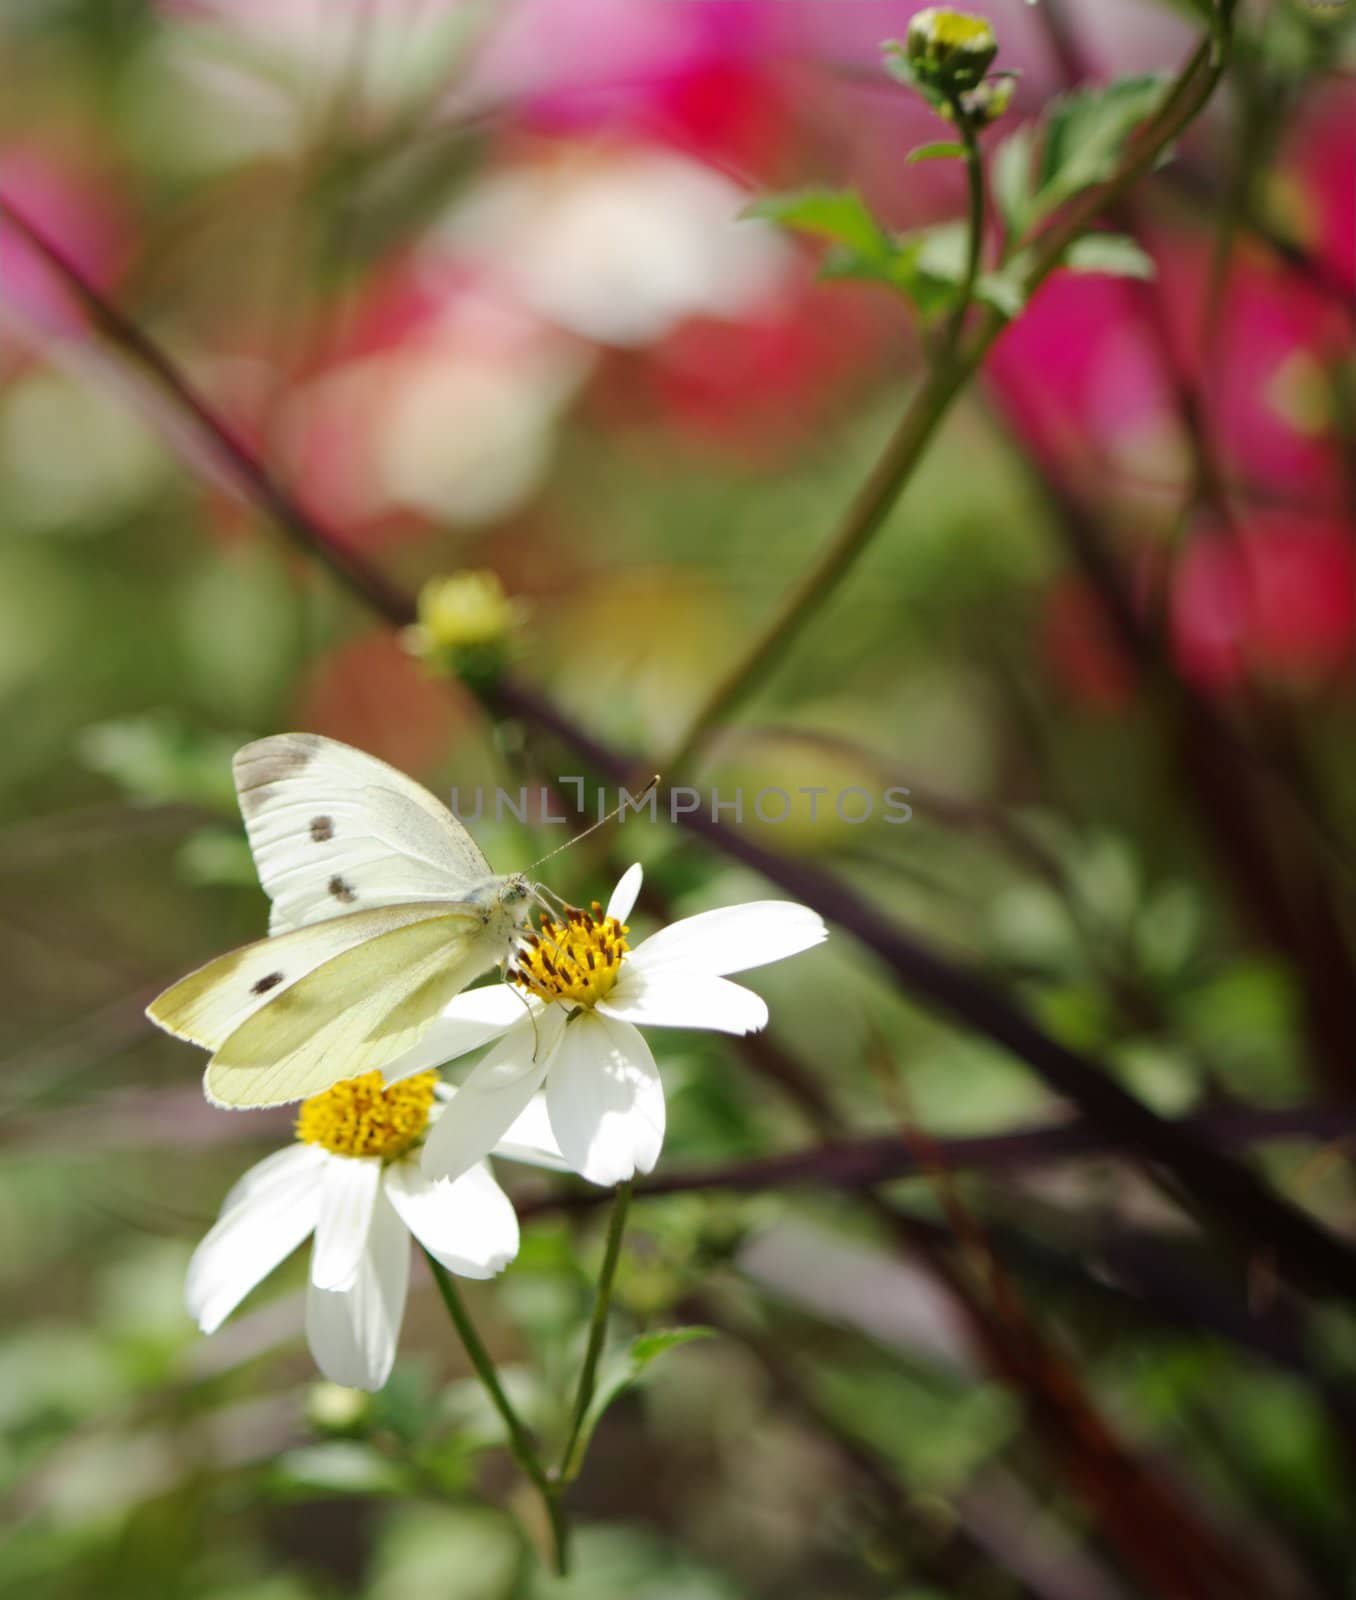 Black and white butterfly on a flower in colorful background